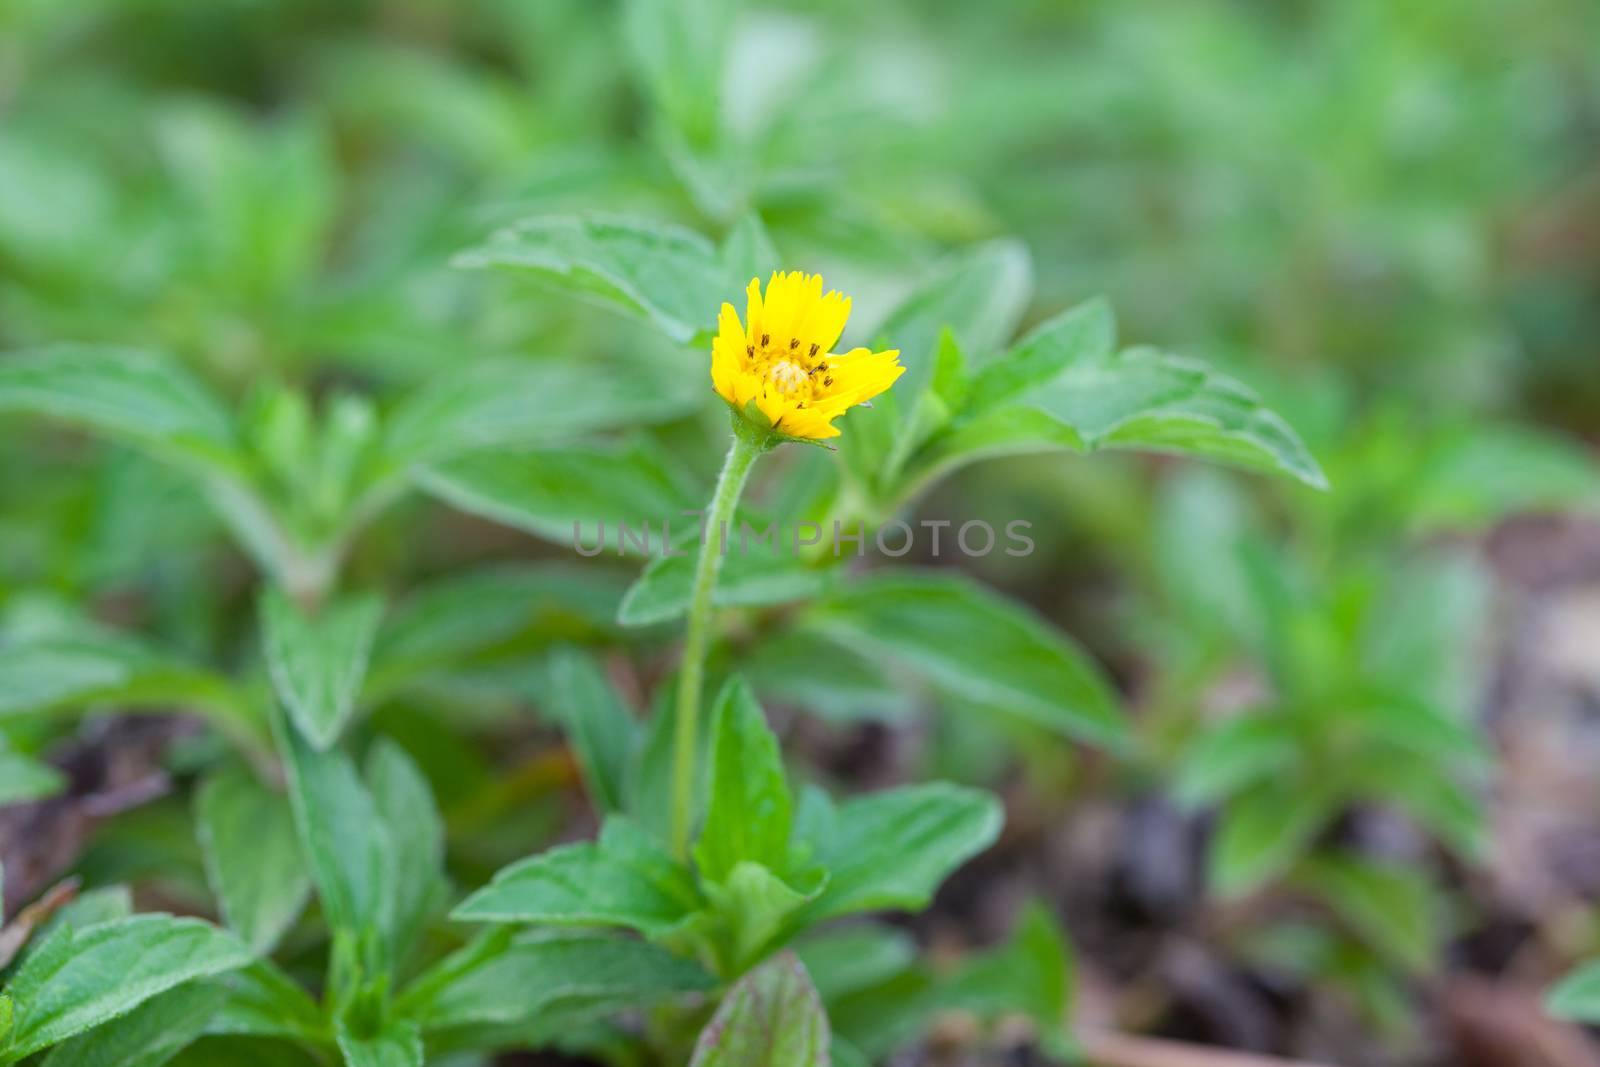 Small yellow flower. Small yellow flowers in full bloom grass.